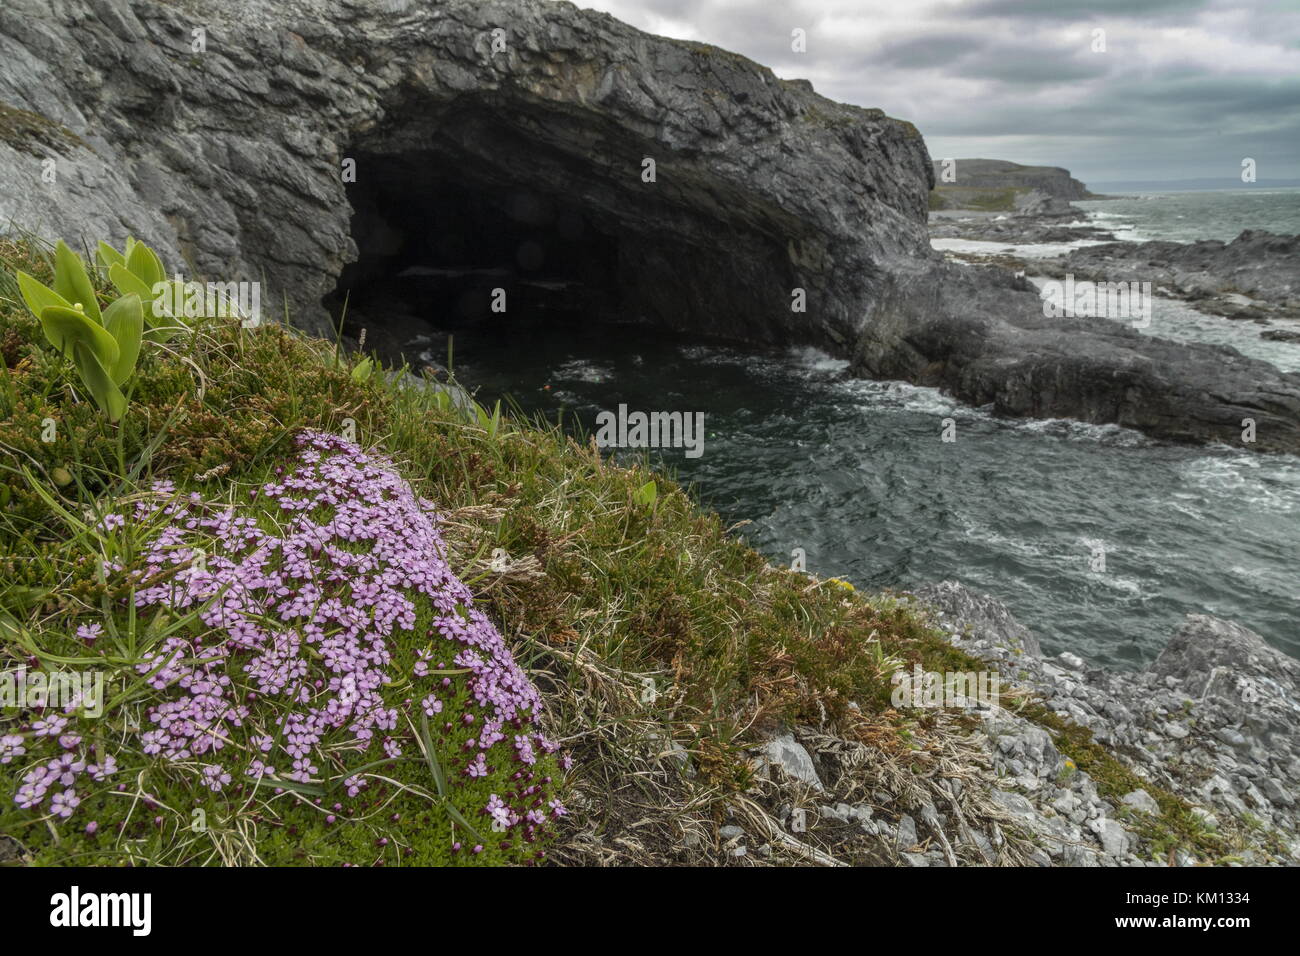 Whale Cove or Big Oven, a marine cave on Burnt Cape Ecological Reserve,with Moss Campion; Burnt Cape, Great Northern Peninsula, Newfoundland Stock Photo